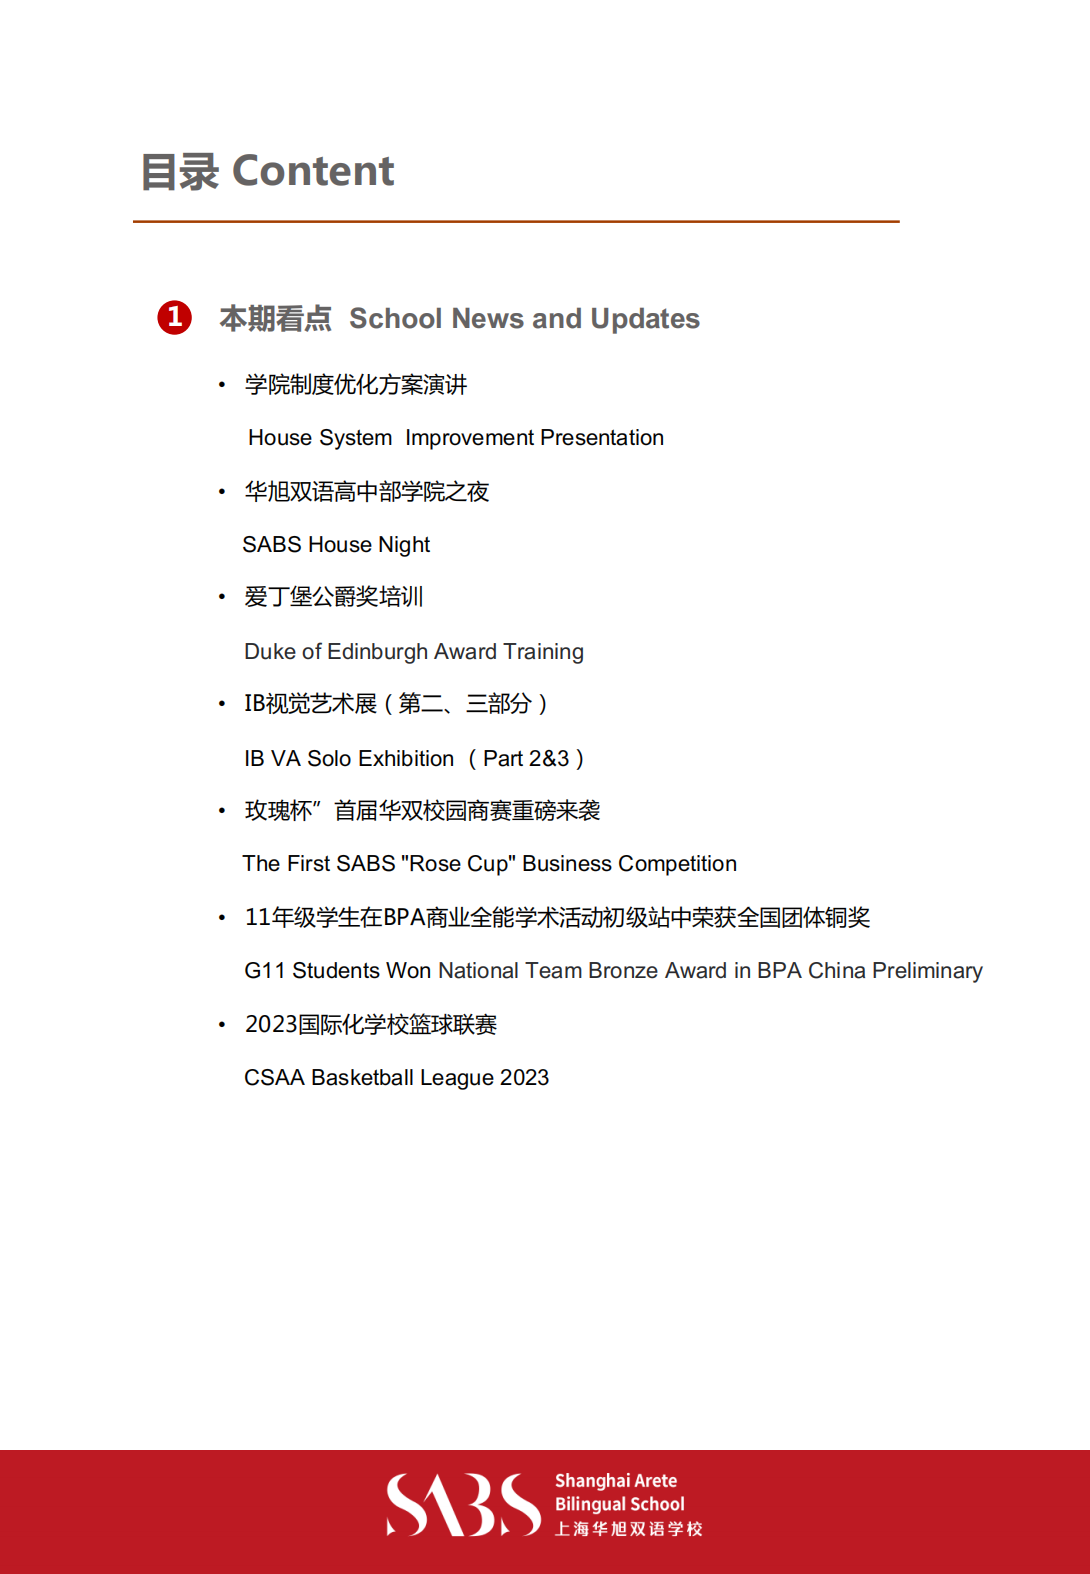 HS 3rd Issue Newsletter pptx（English）_01.png